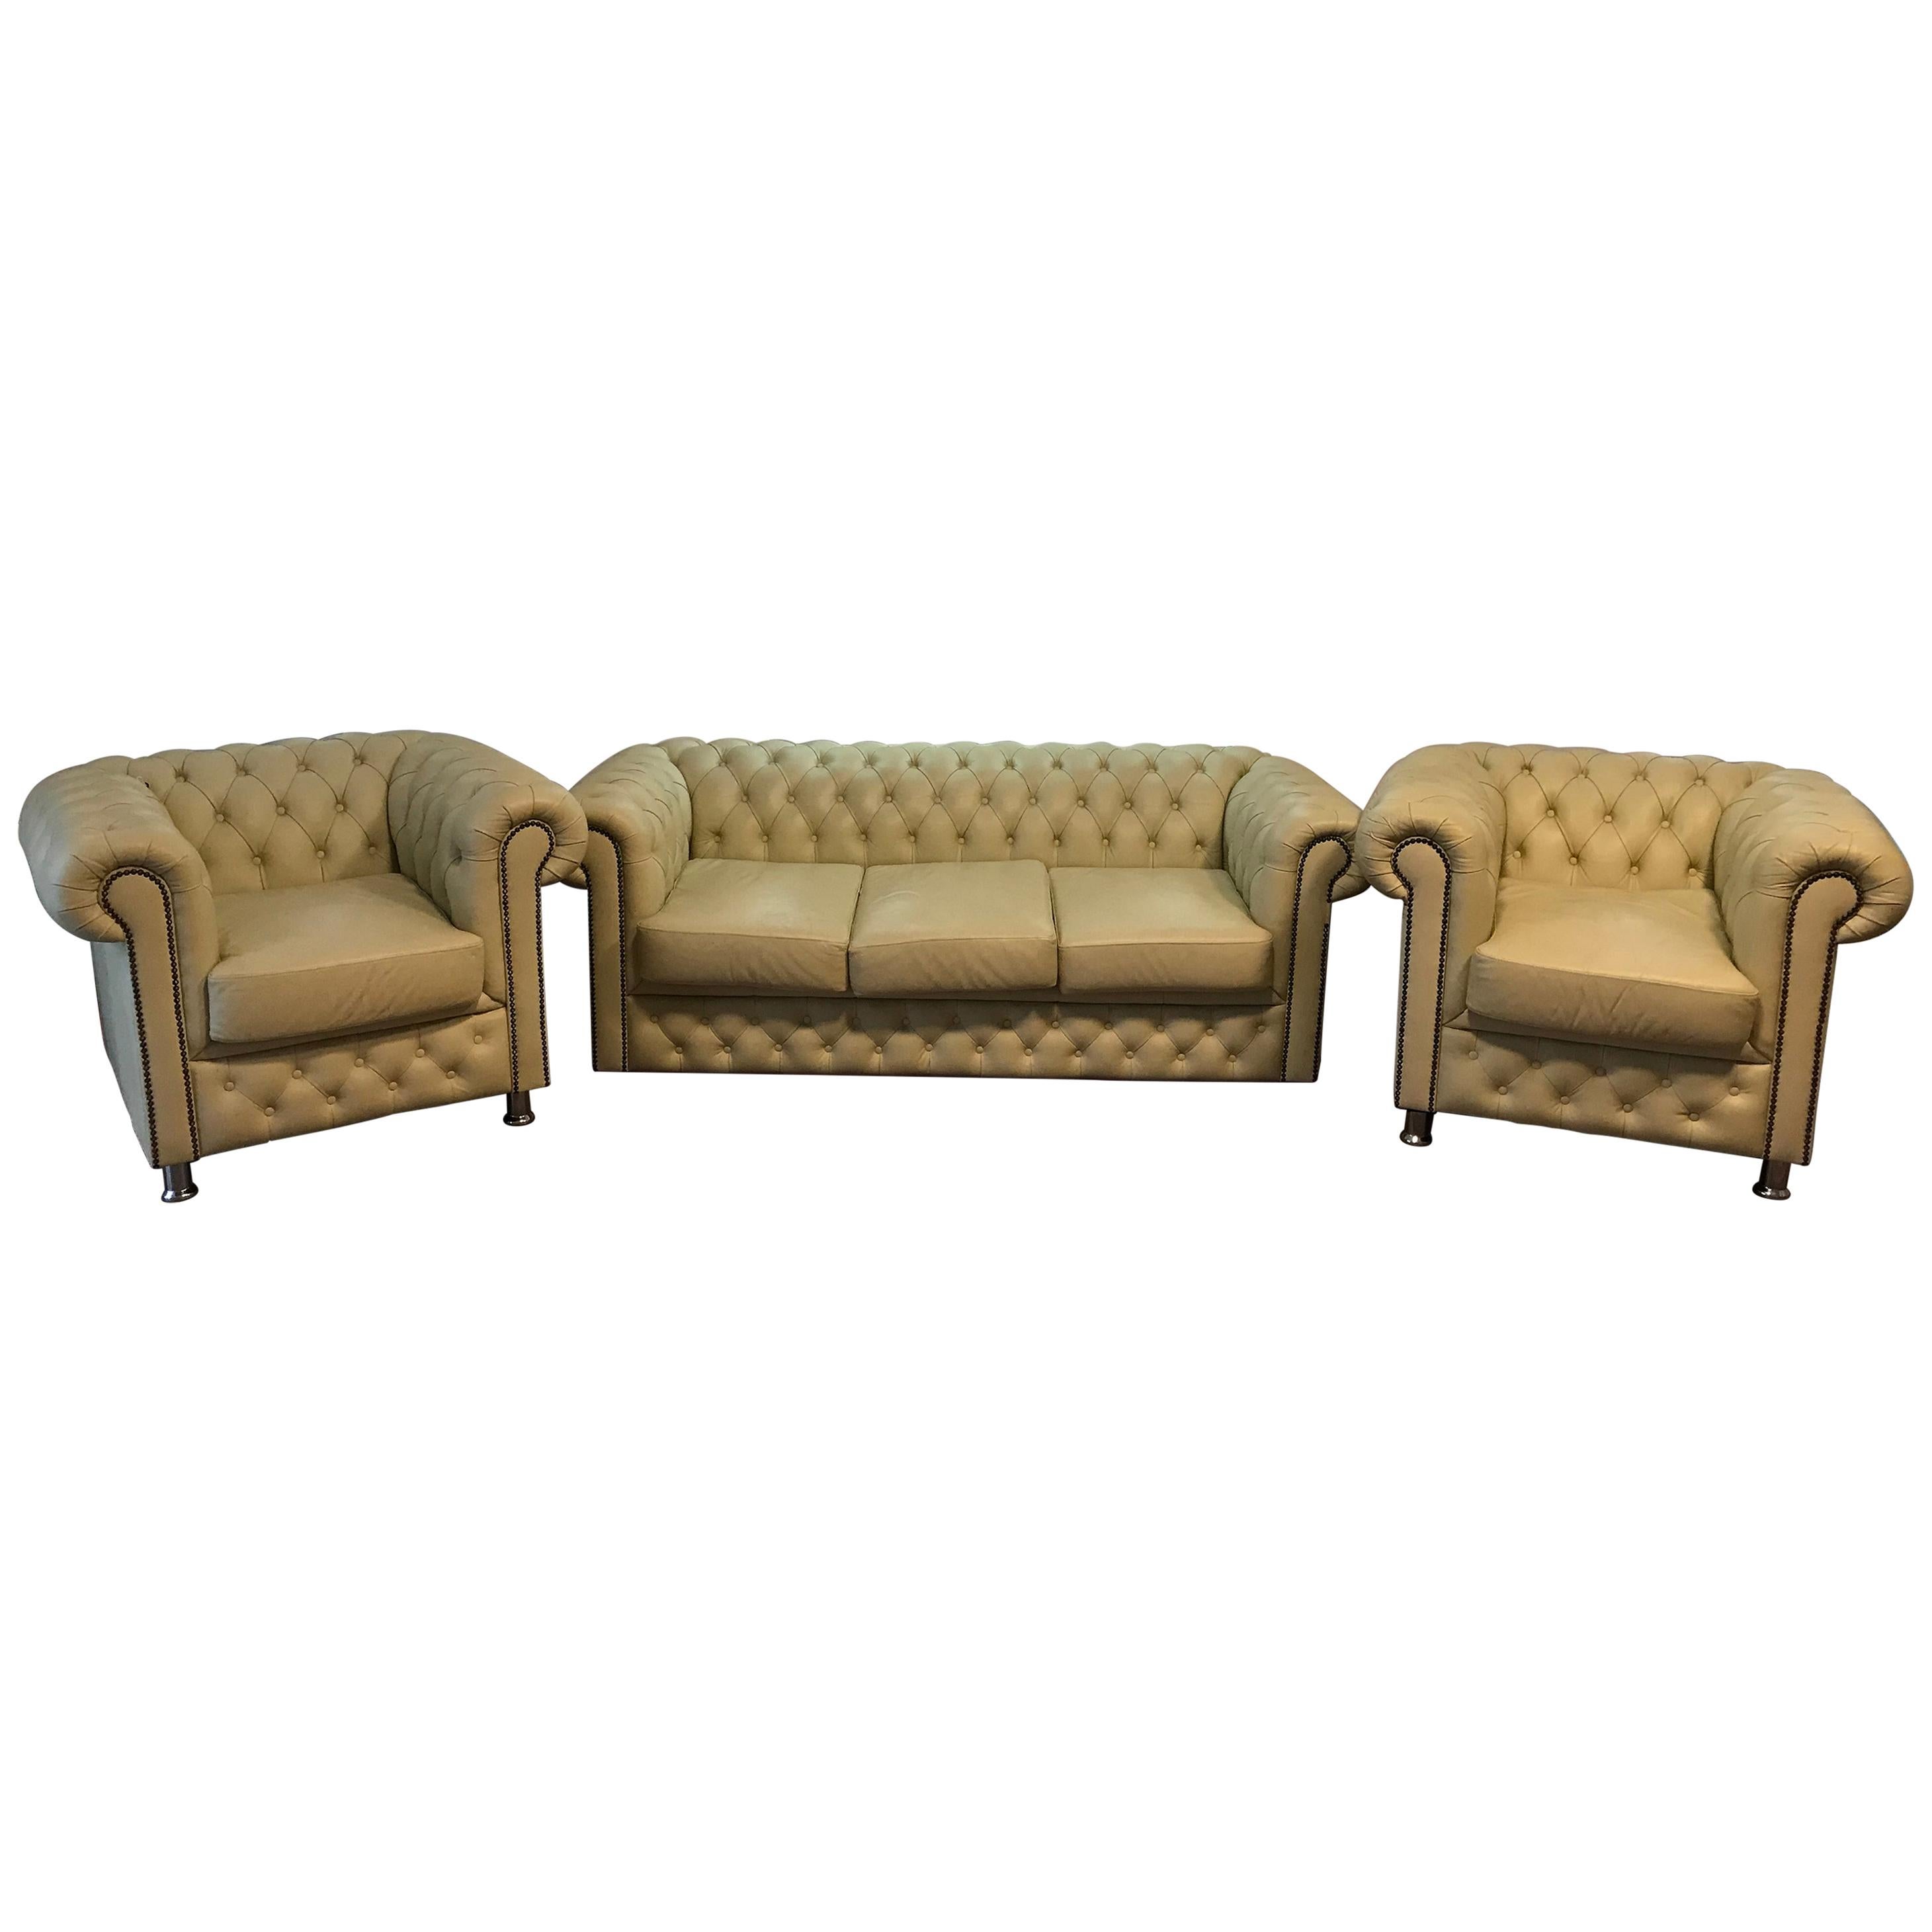 Original English Chesterfield Set of 3-Seat and 2 Armchairs in Cream Beige